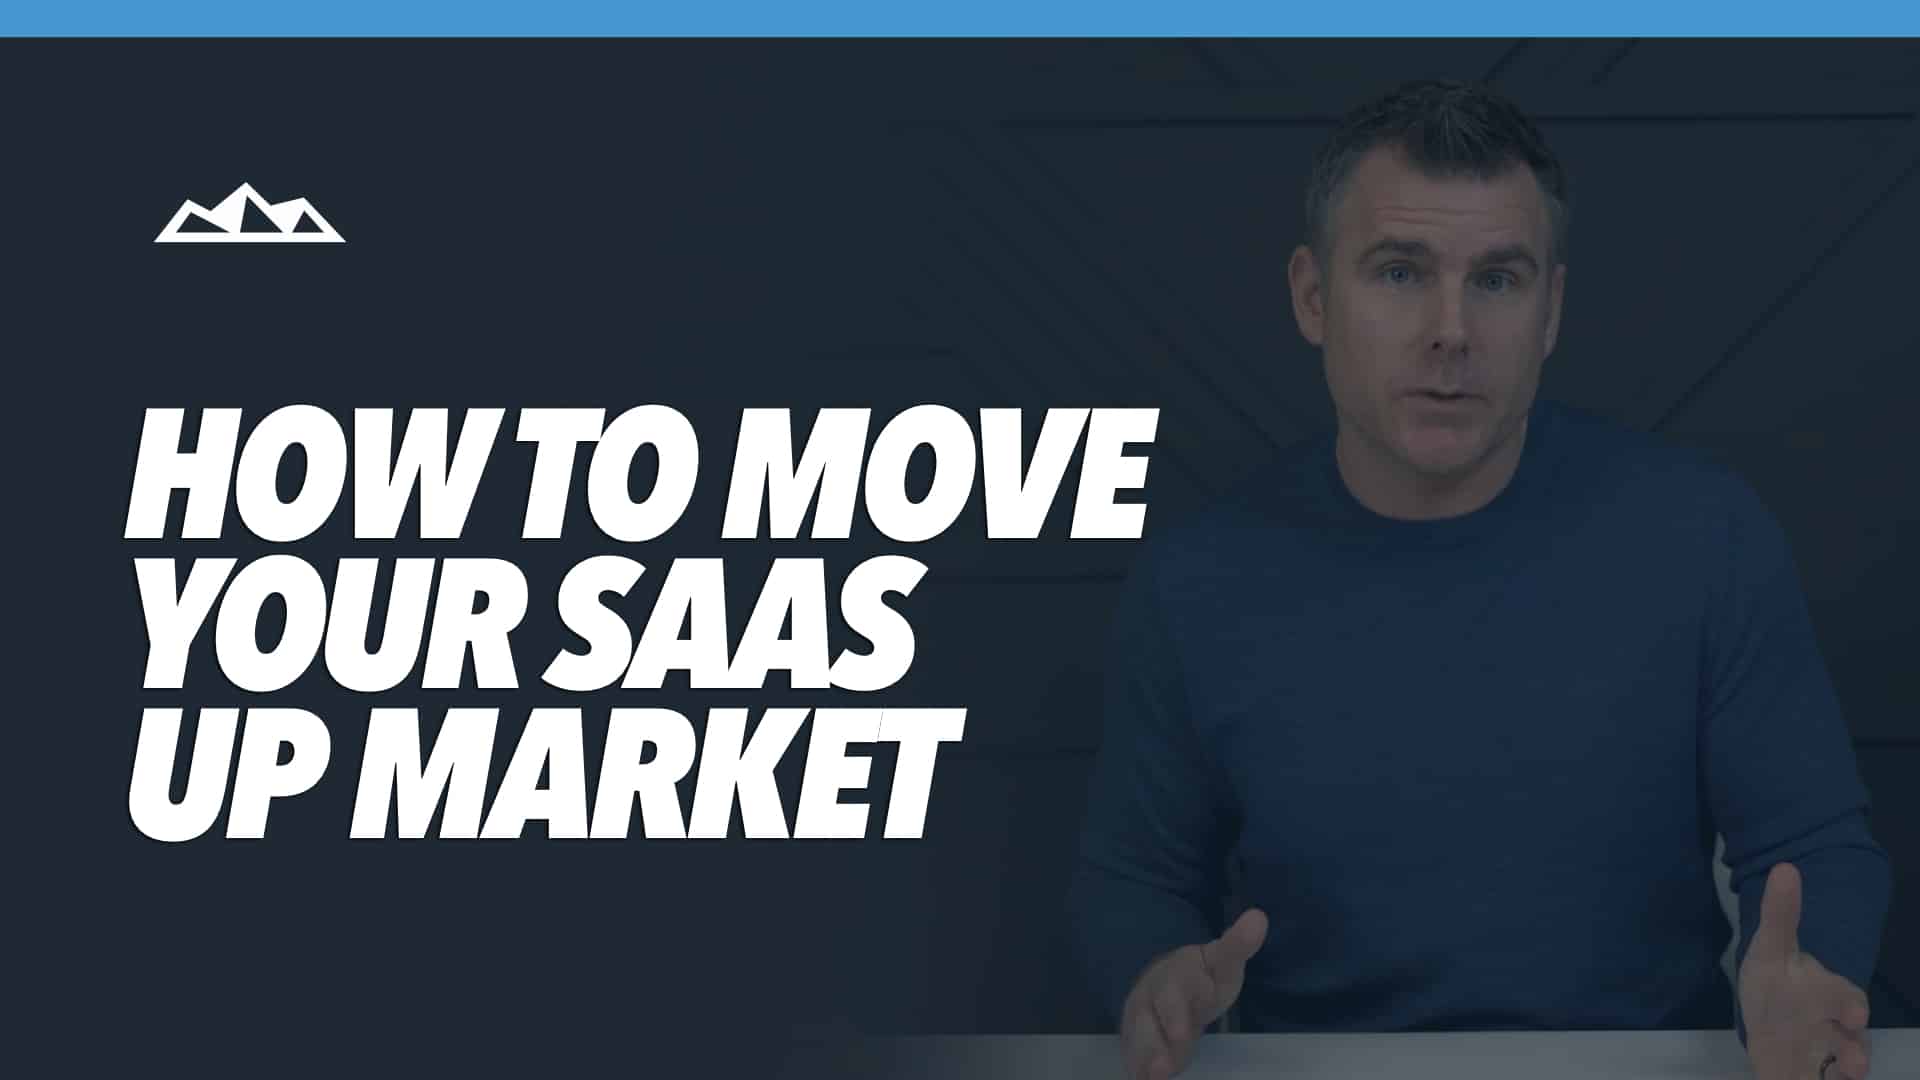 Moving Up Market in The SaaS World: The Transition from SMBs to Mid-Market & Enterprise